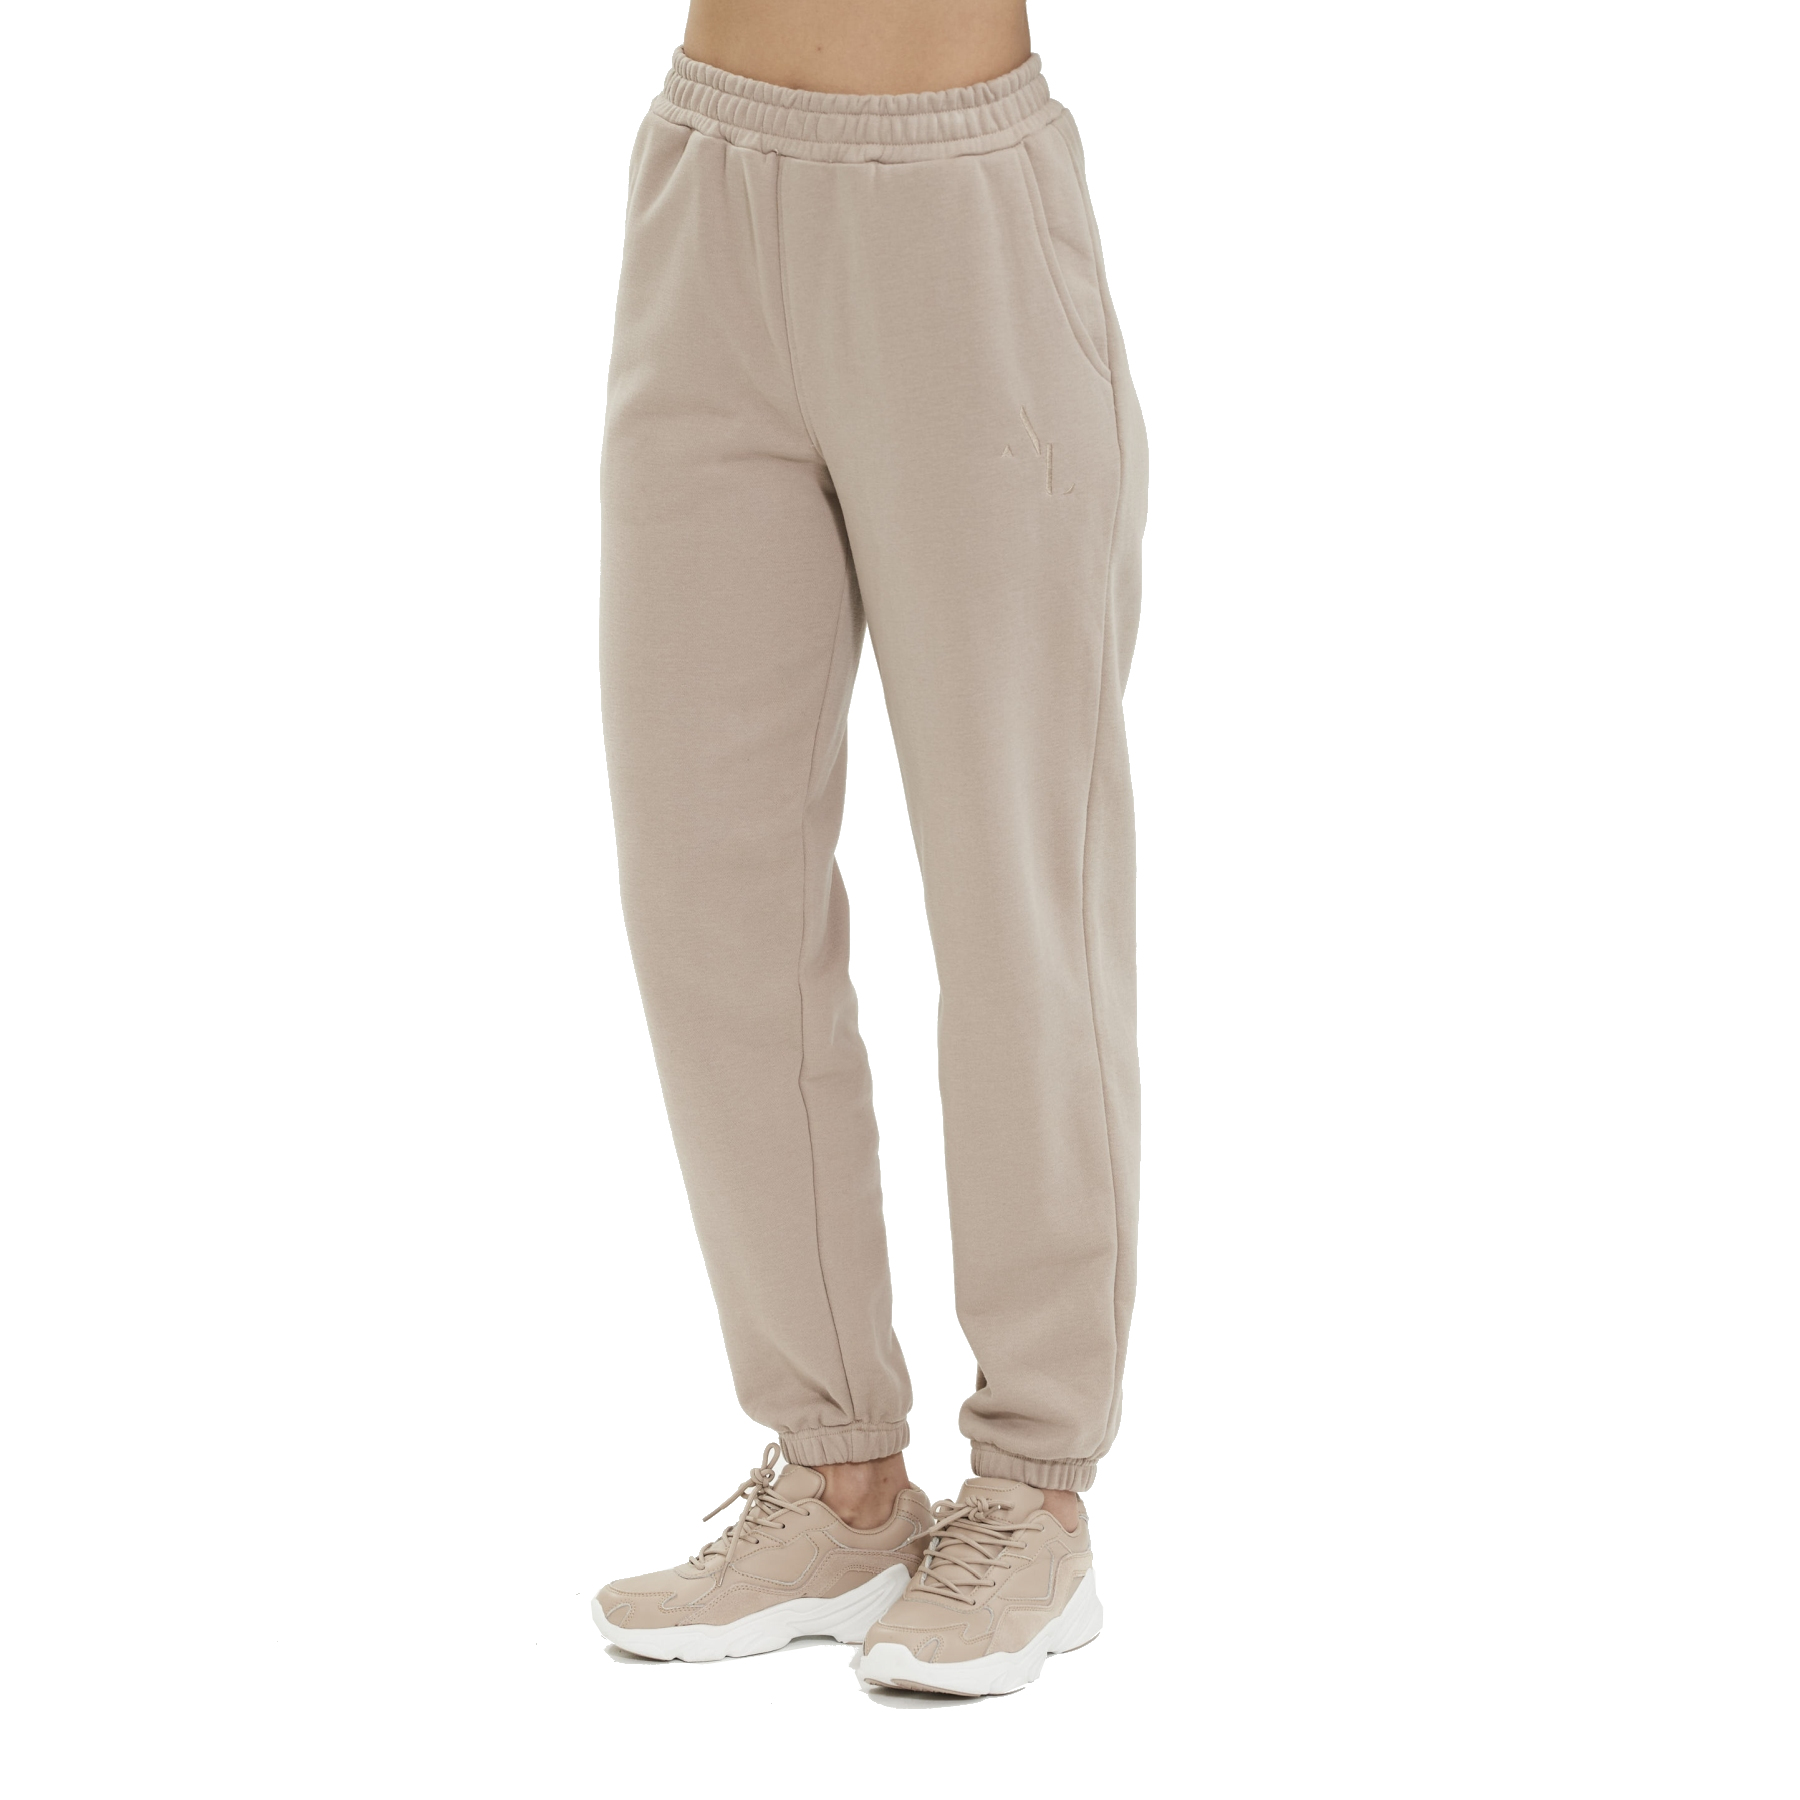 Picture of Athlecia Lia Sweat Pants Women - Atmosphere